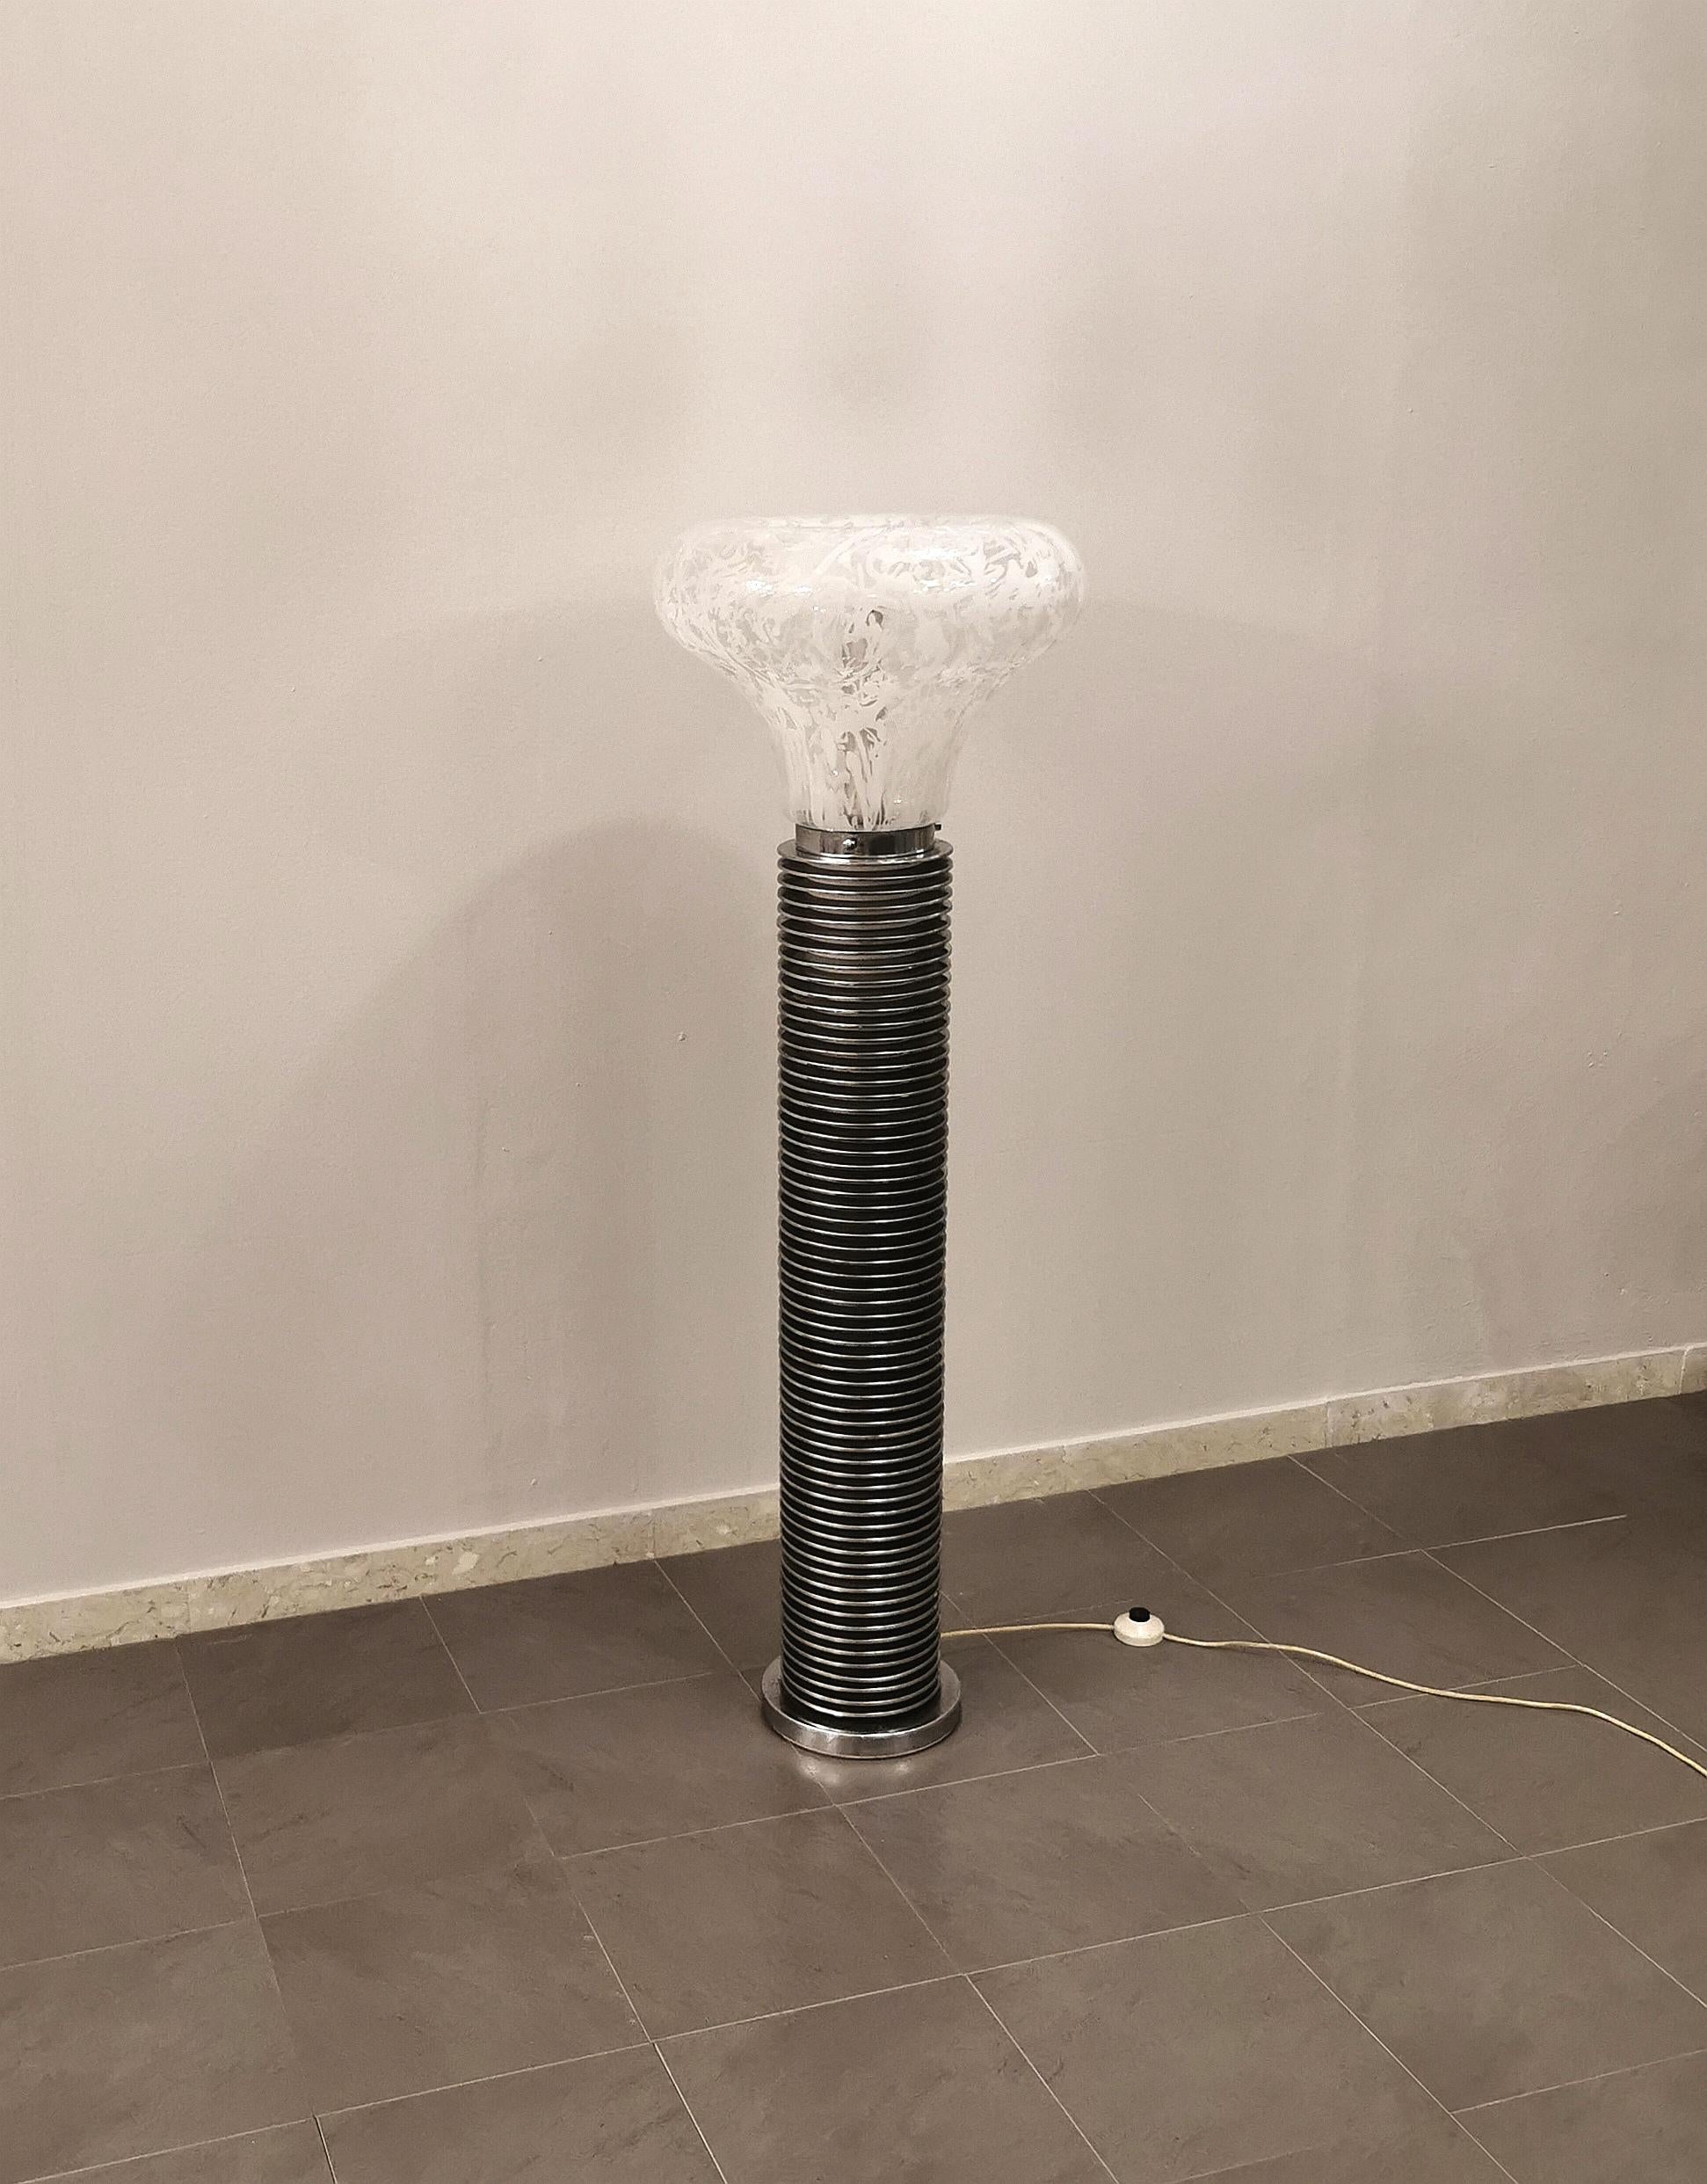 Particular floor lamp with 1 light E27 designed by the Italian designer Carlo Nason and produced by the Venetian glassmaker Mazzega, in the 70s. The lamp has a chromed metal structure made up of 63 round rings with a white and transparent Murano